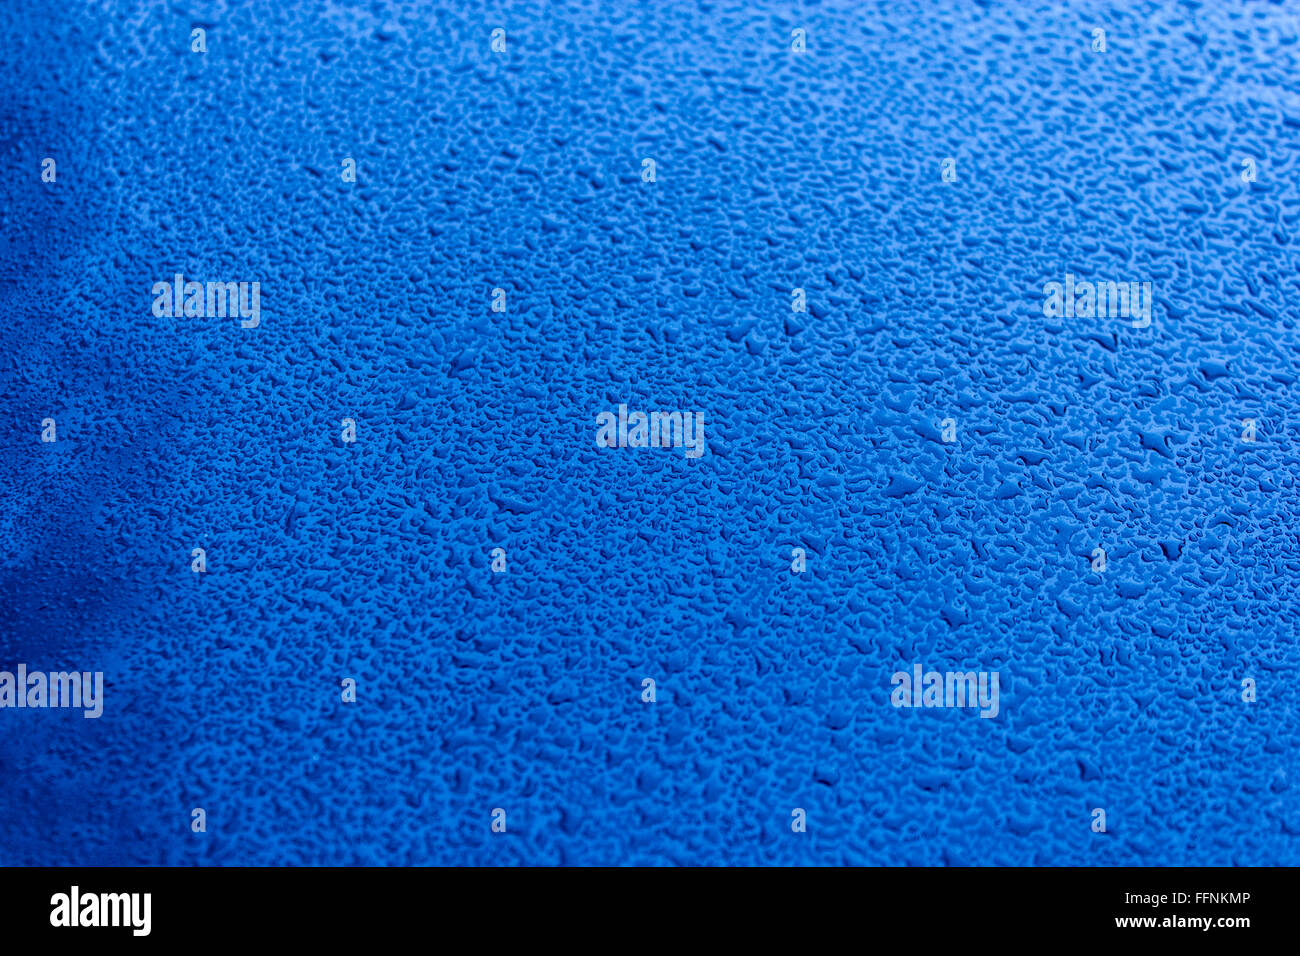 Waterdrops on blue car paint as underground, shallow focus Stock Photo